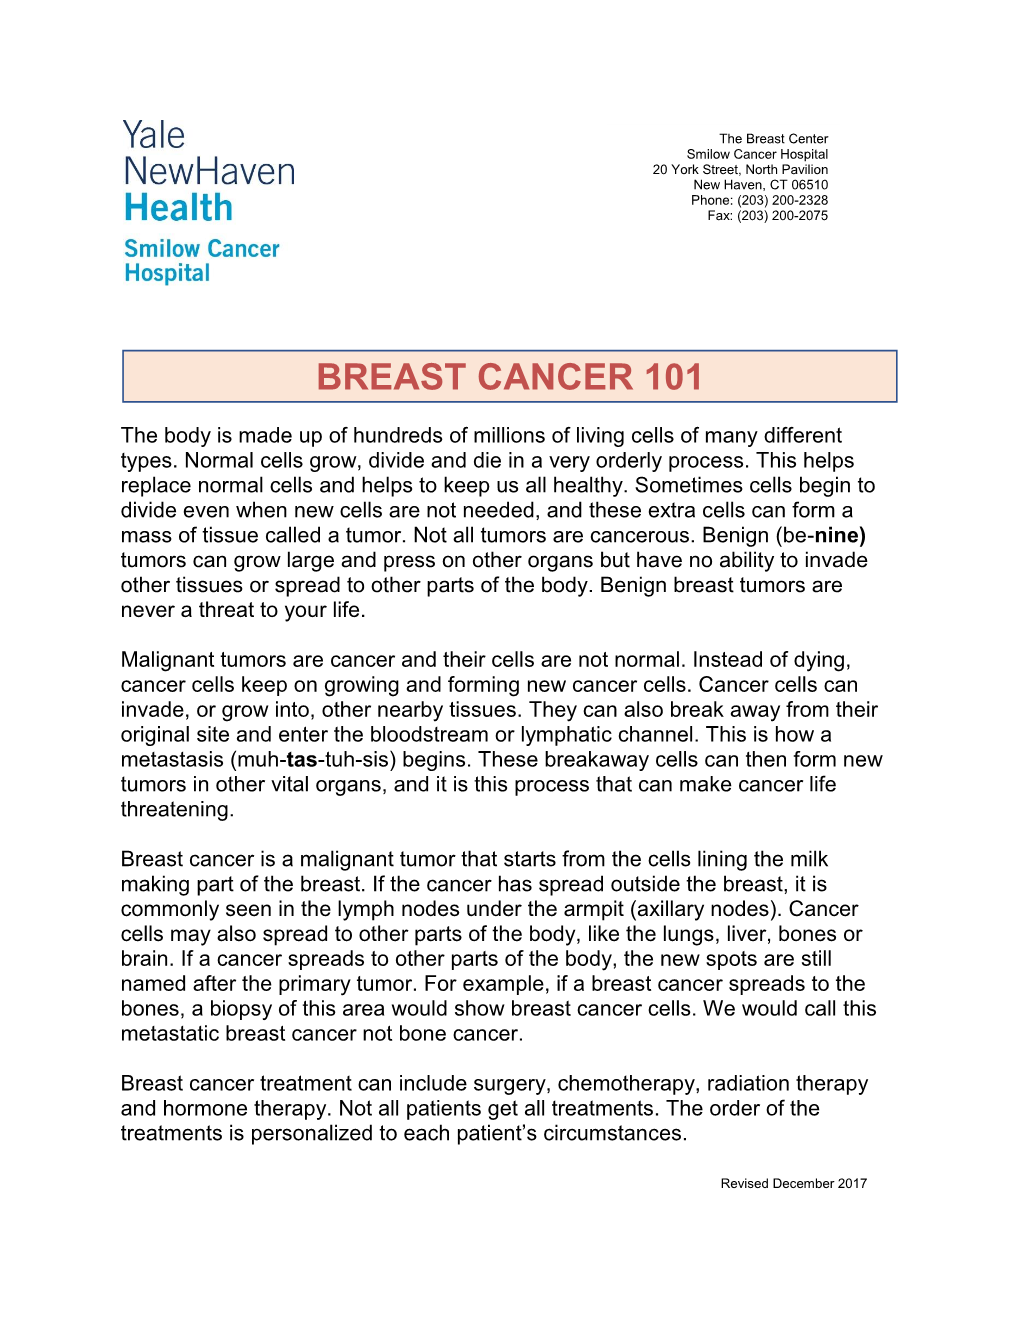 Breast Cancer 101